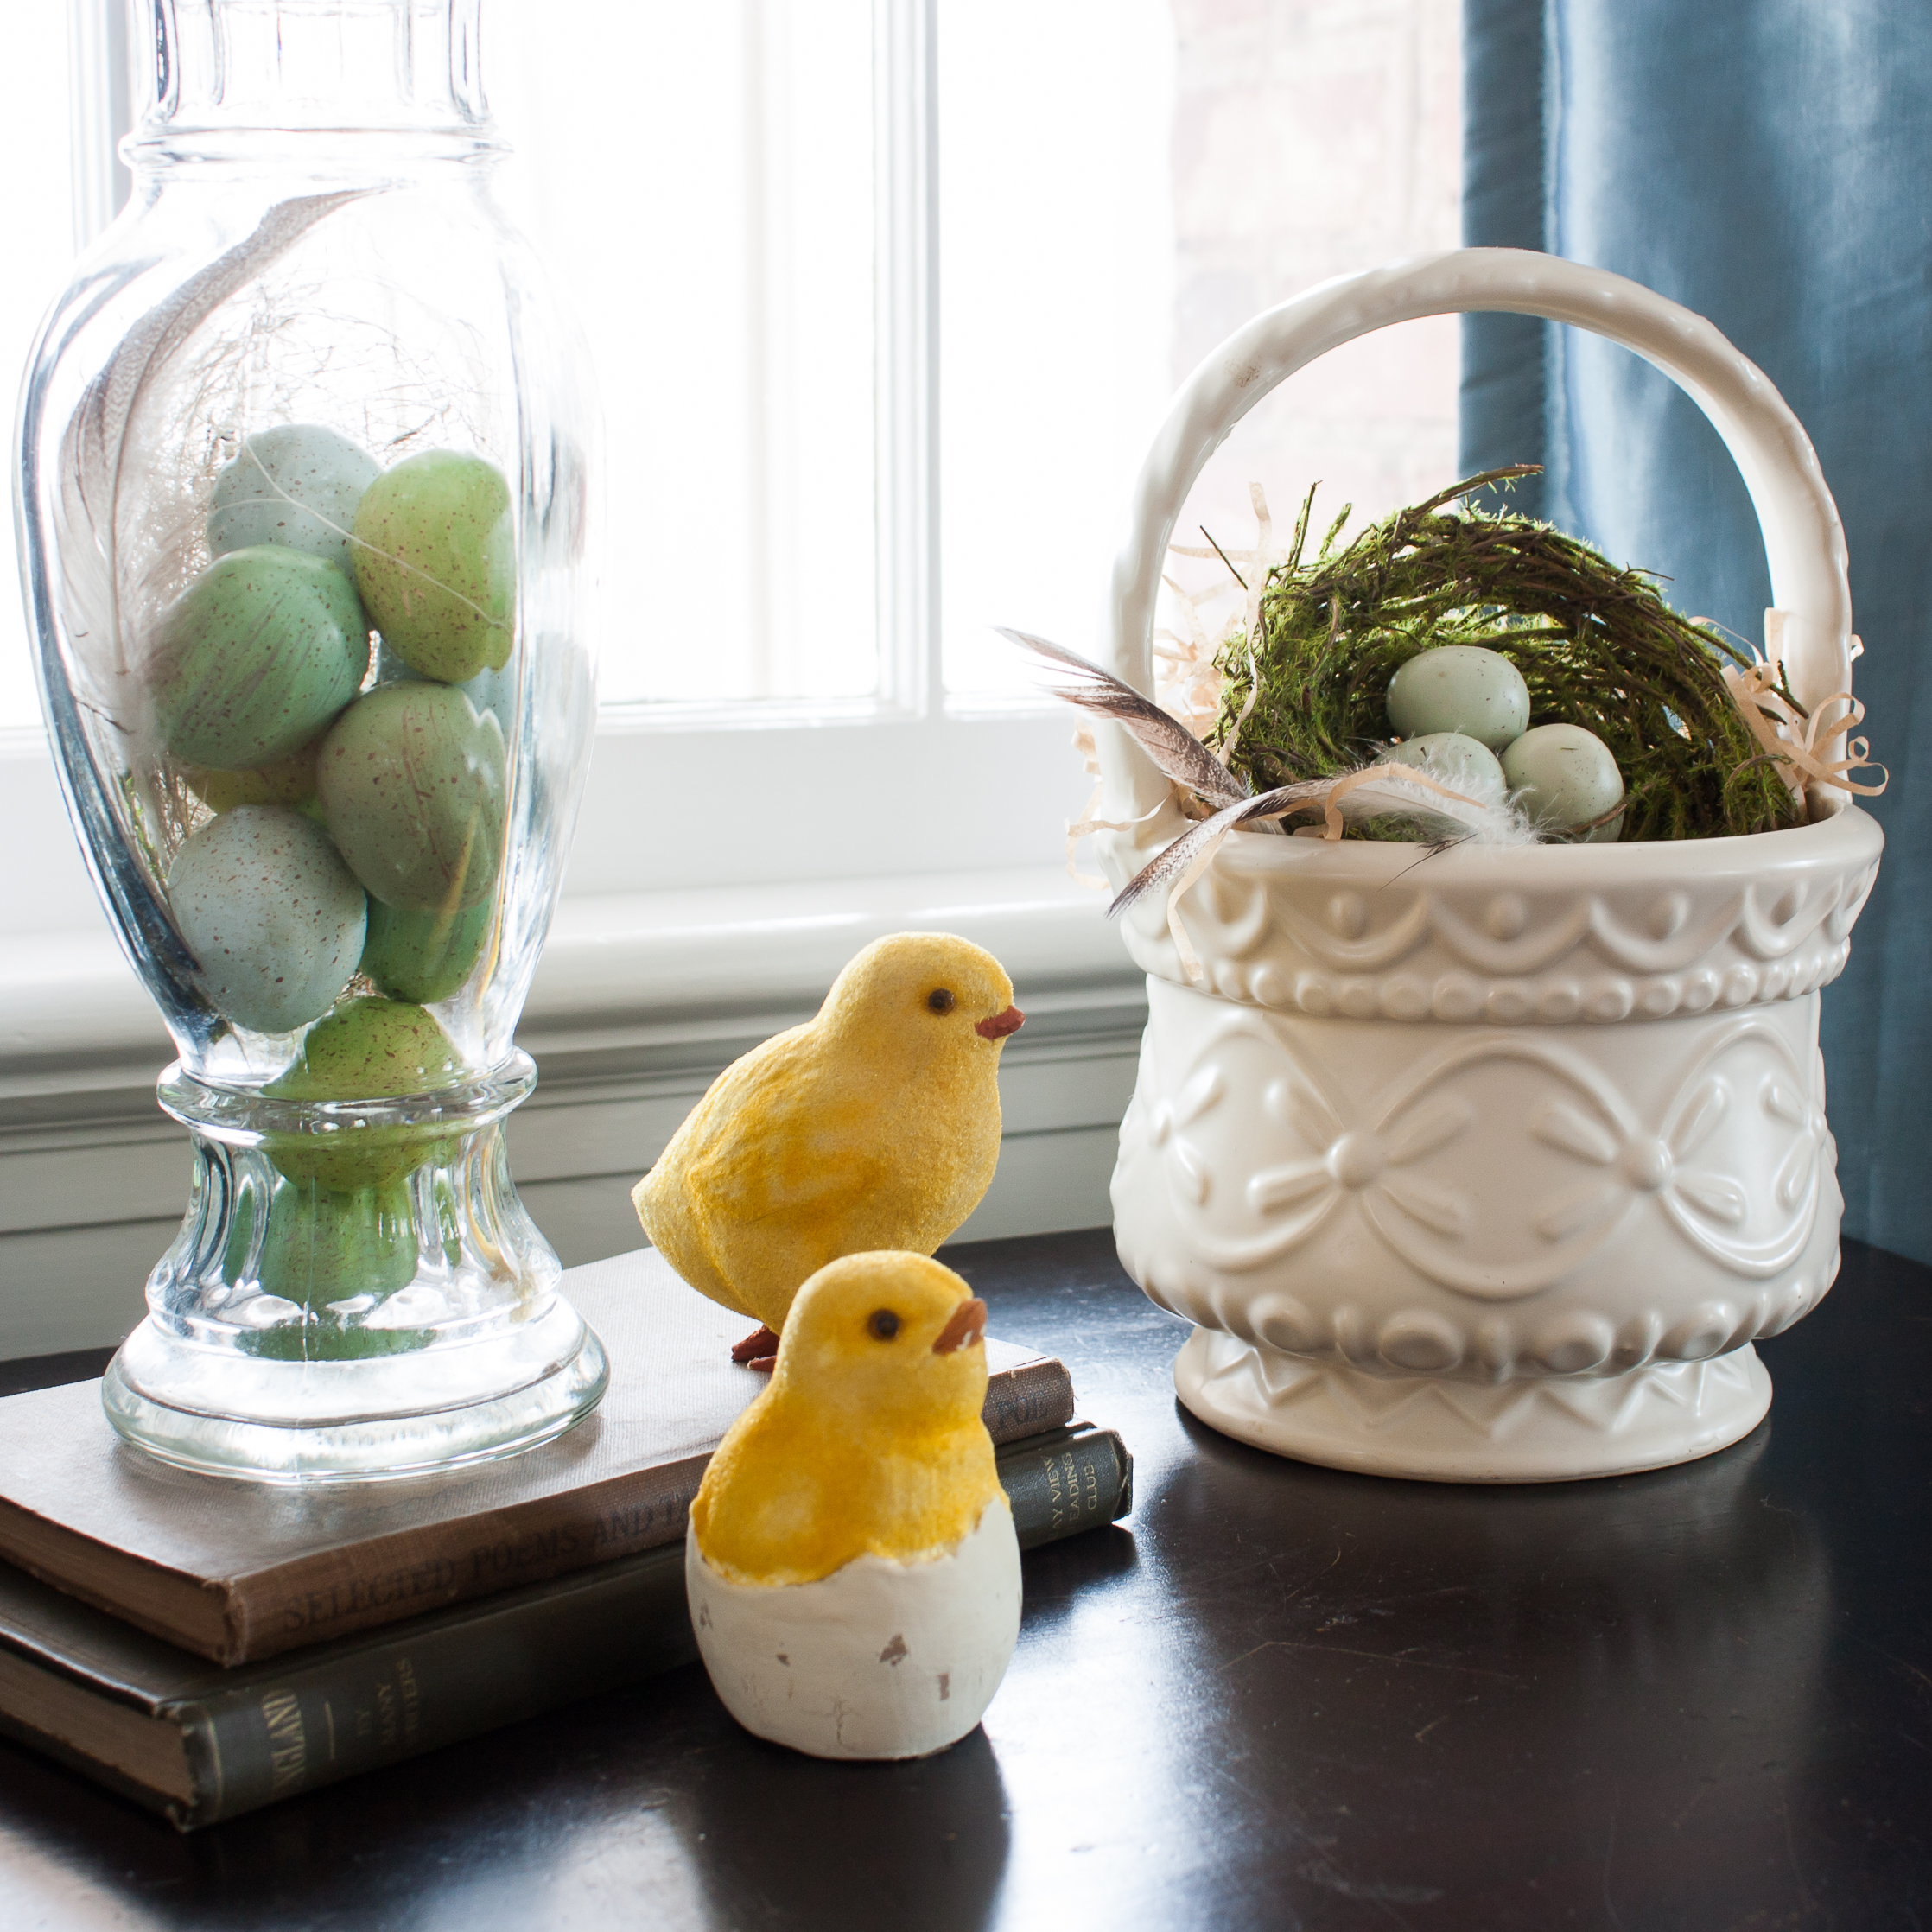 Decorating for Easter with Vintage